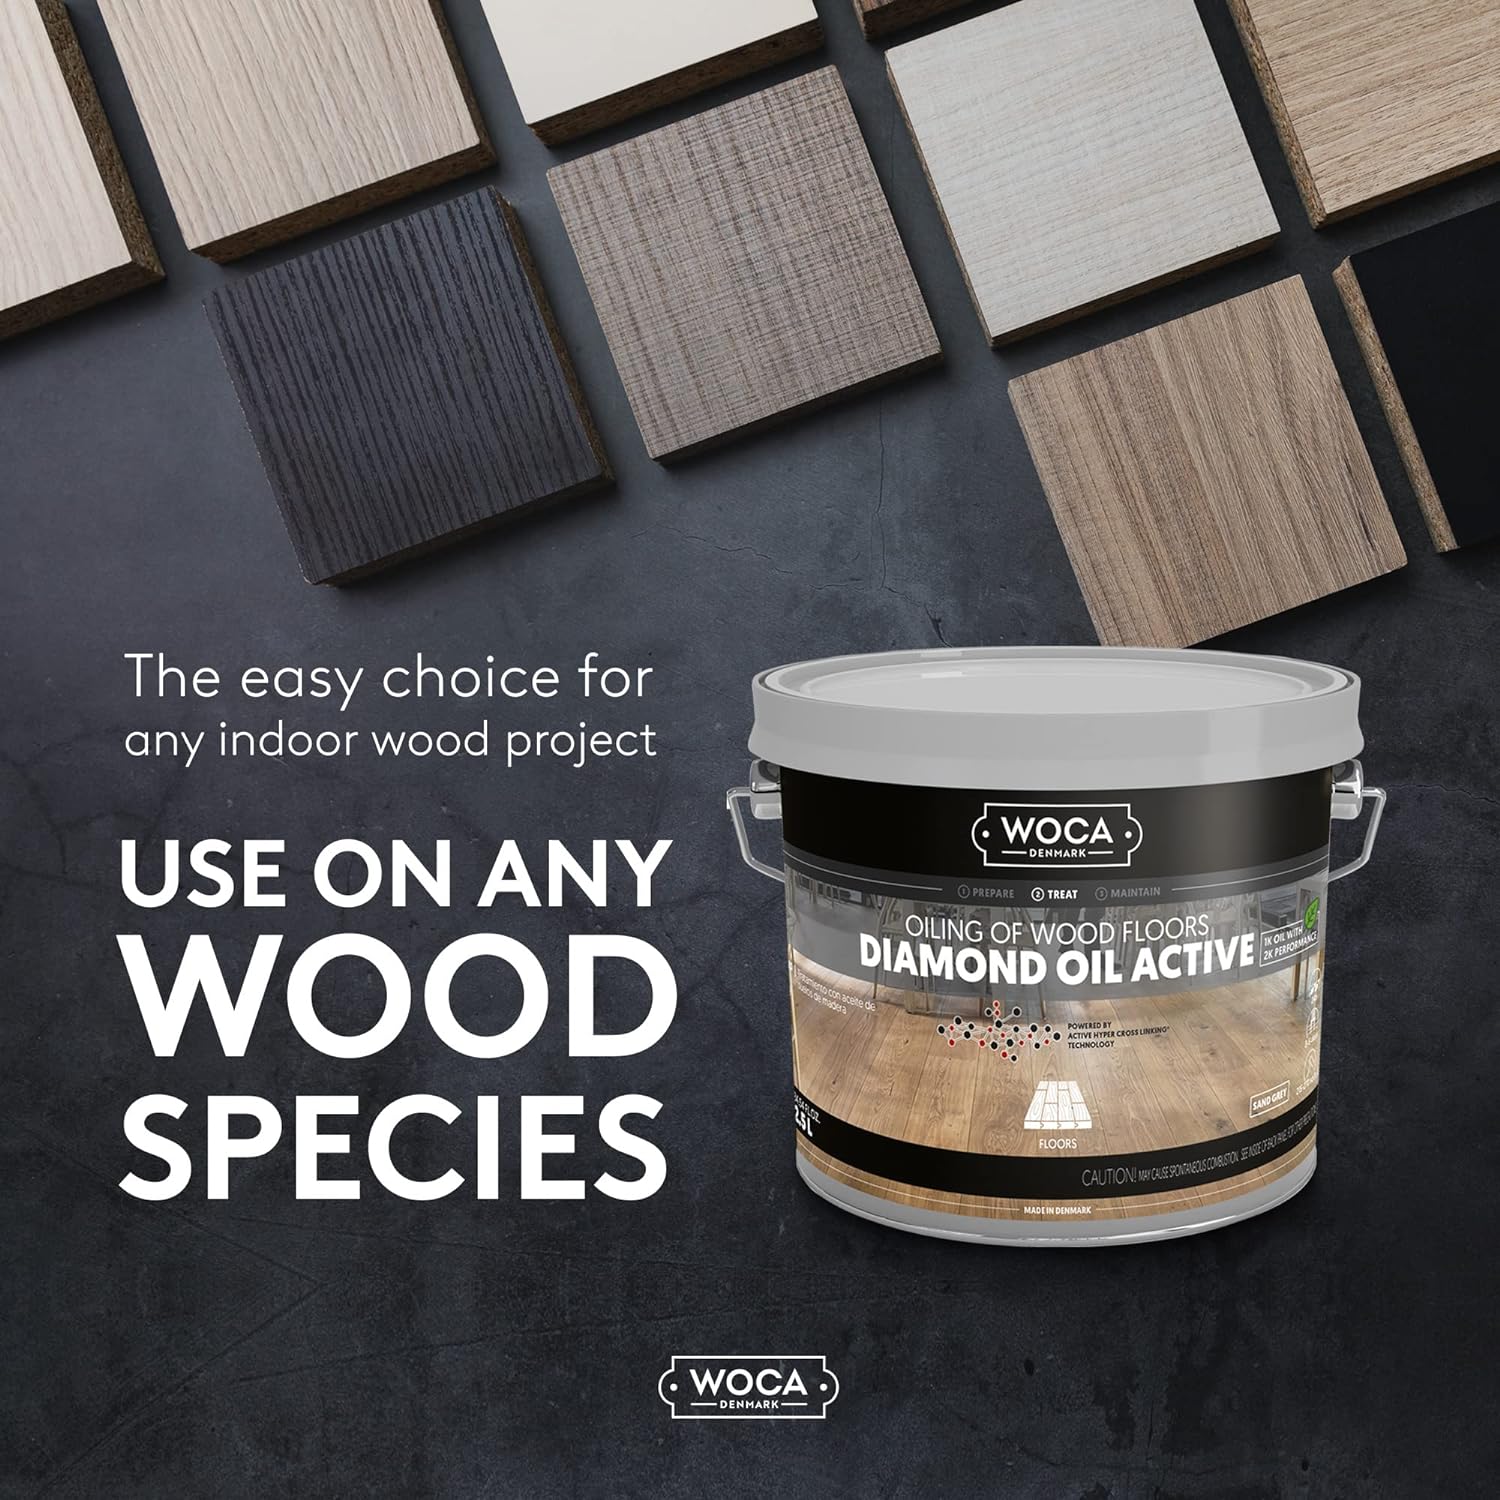 WOCA Denmark Diamond Oil Active, Sand Grey |250 ml| Wood Finish - Low VOC Plant Based Penetrating Wood Oil for Untreated, New, or Newly-Sanded Wooden Surfaces - Amazon.com